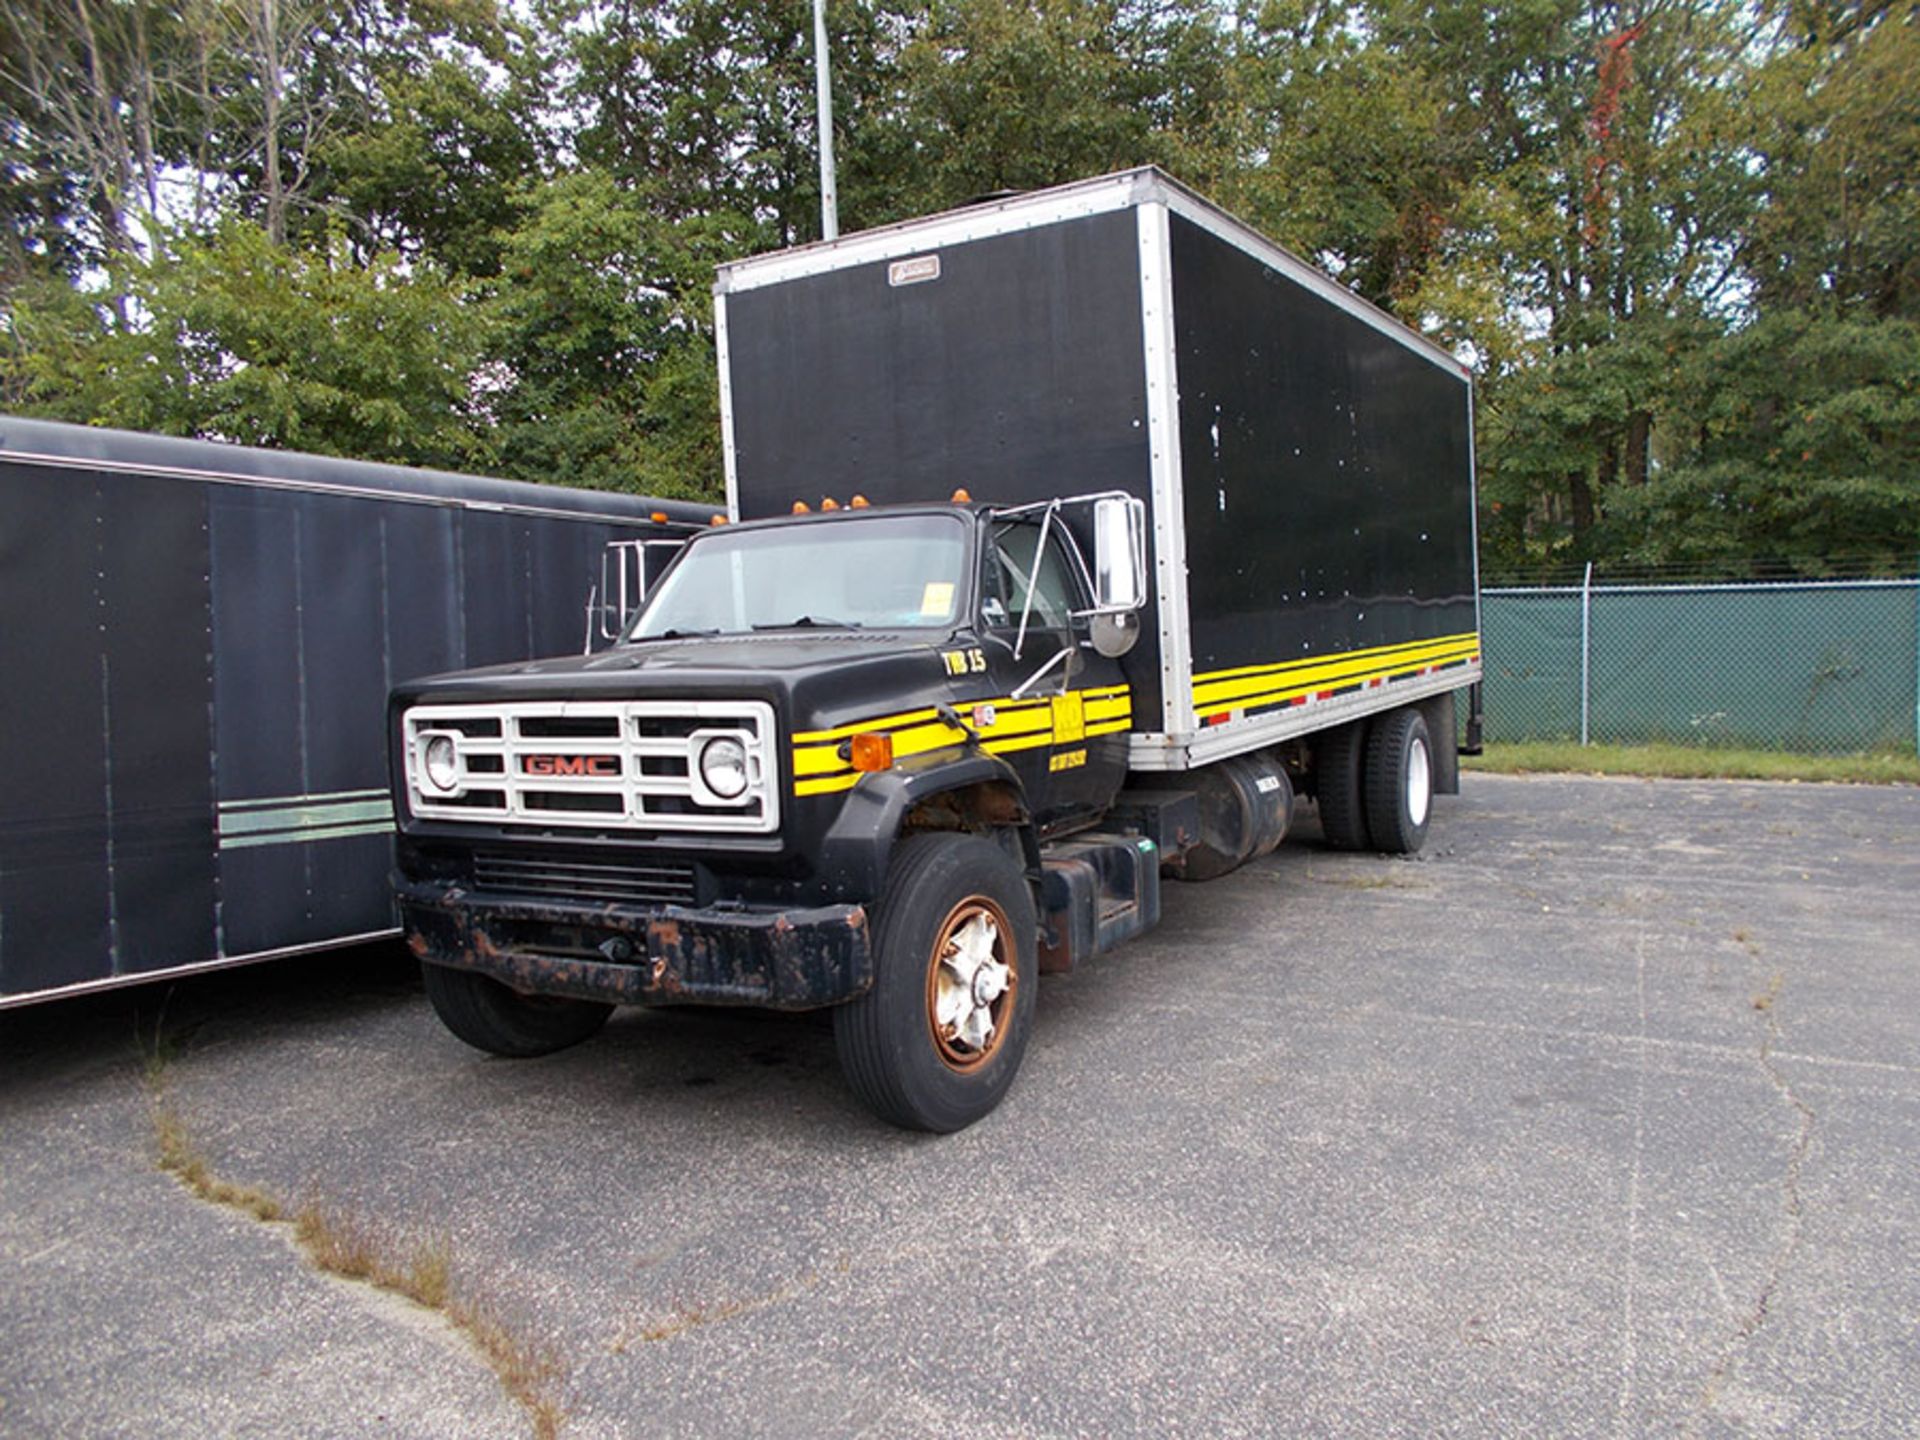 1990 GMC BOX TRUCK WITH WATER BLASTER; 213,780 MILES, VIN# 1GDL7D1F7LV504633, WATER BLASTER